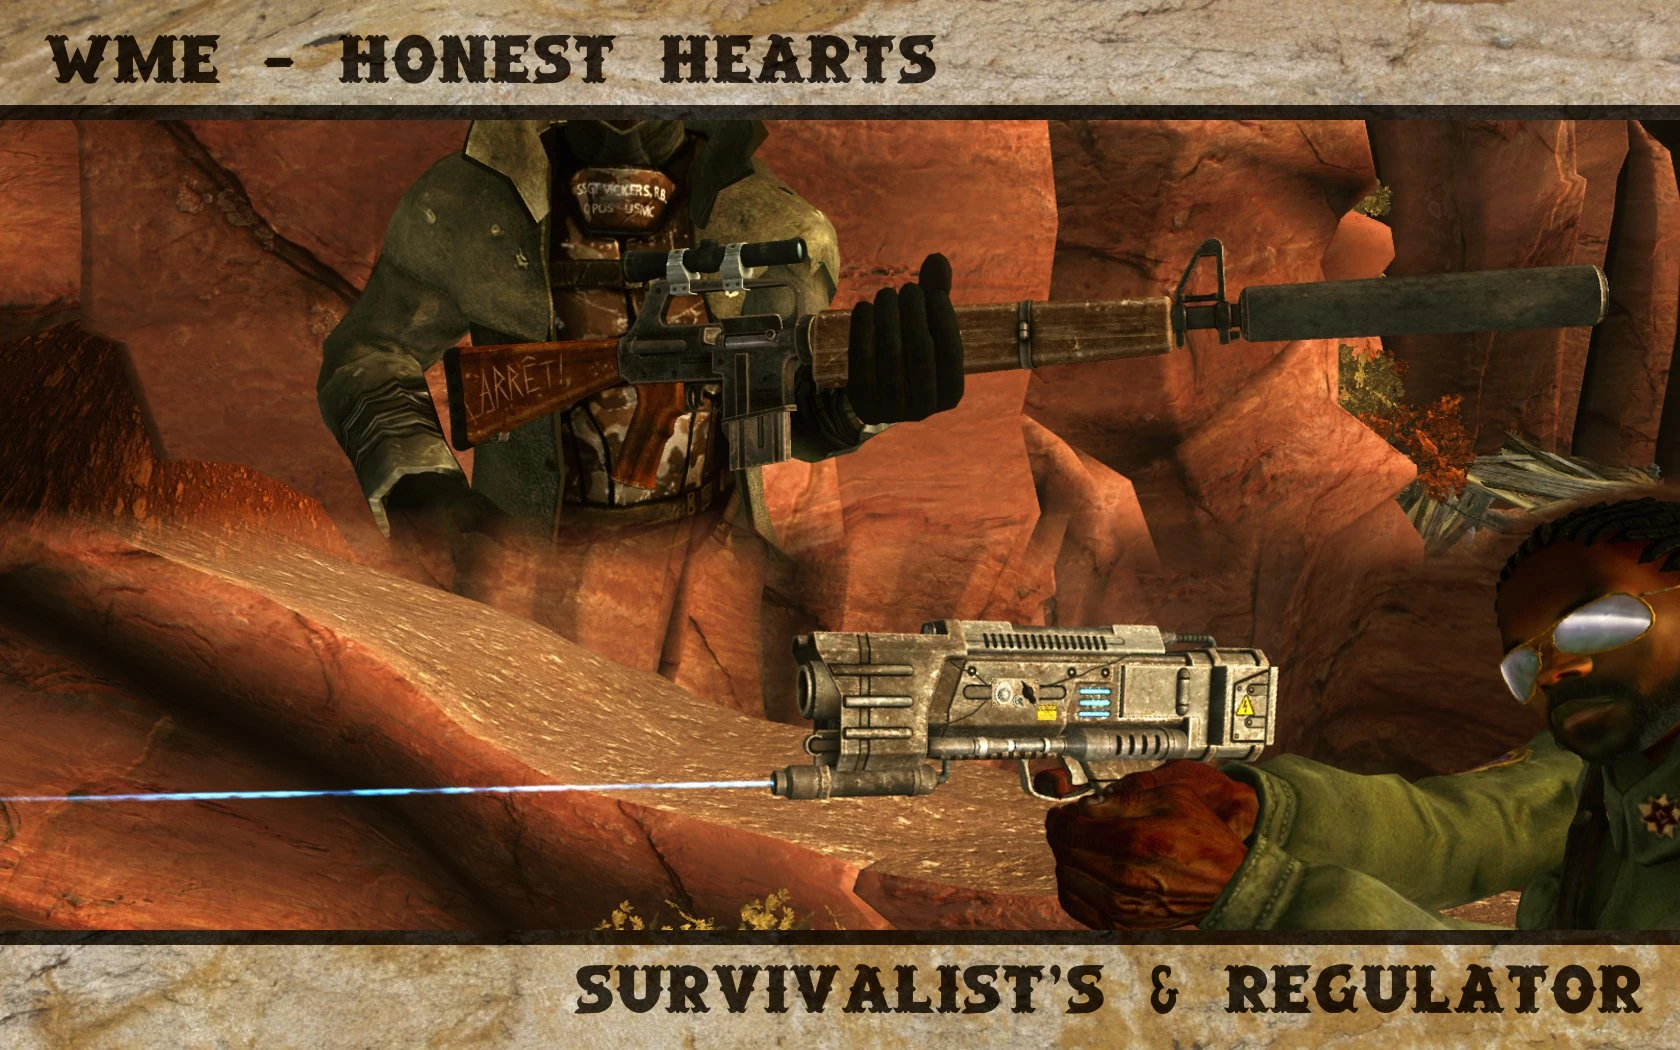 Honest hearts fallout new. Fallout New Vegas honest Hearts карта. Fallout New Vegas DLC honest Hearts. Фоллаут Нью Вегас ДЛС honest Hearts. Броня honest Hearts Fallout New Vegas.